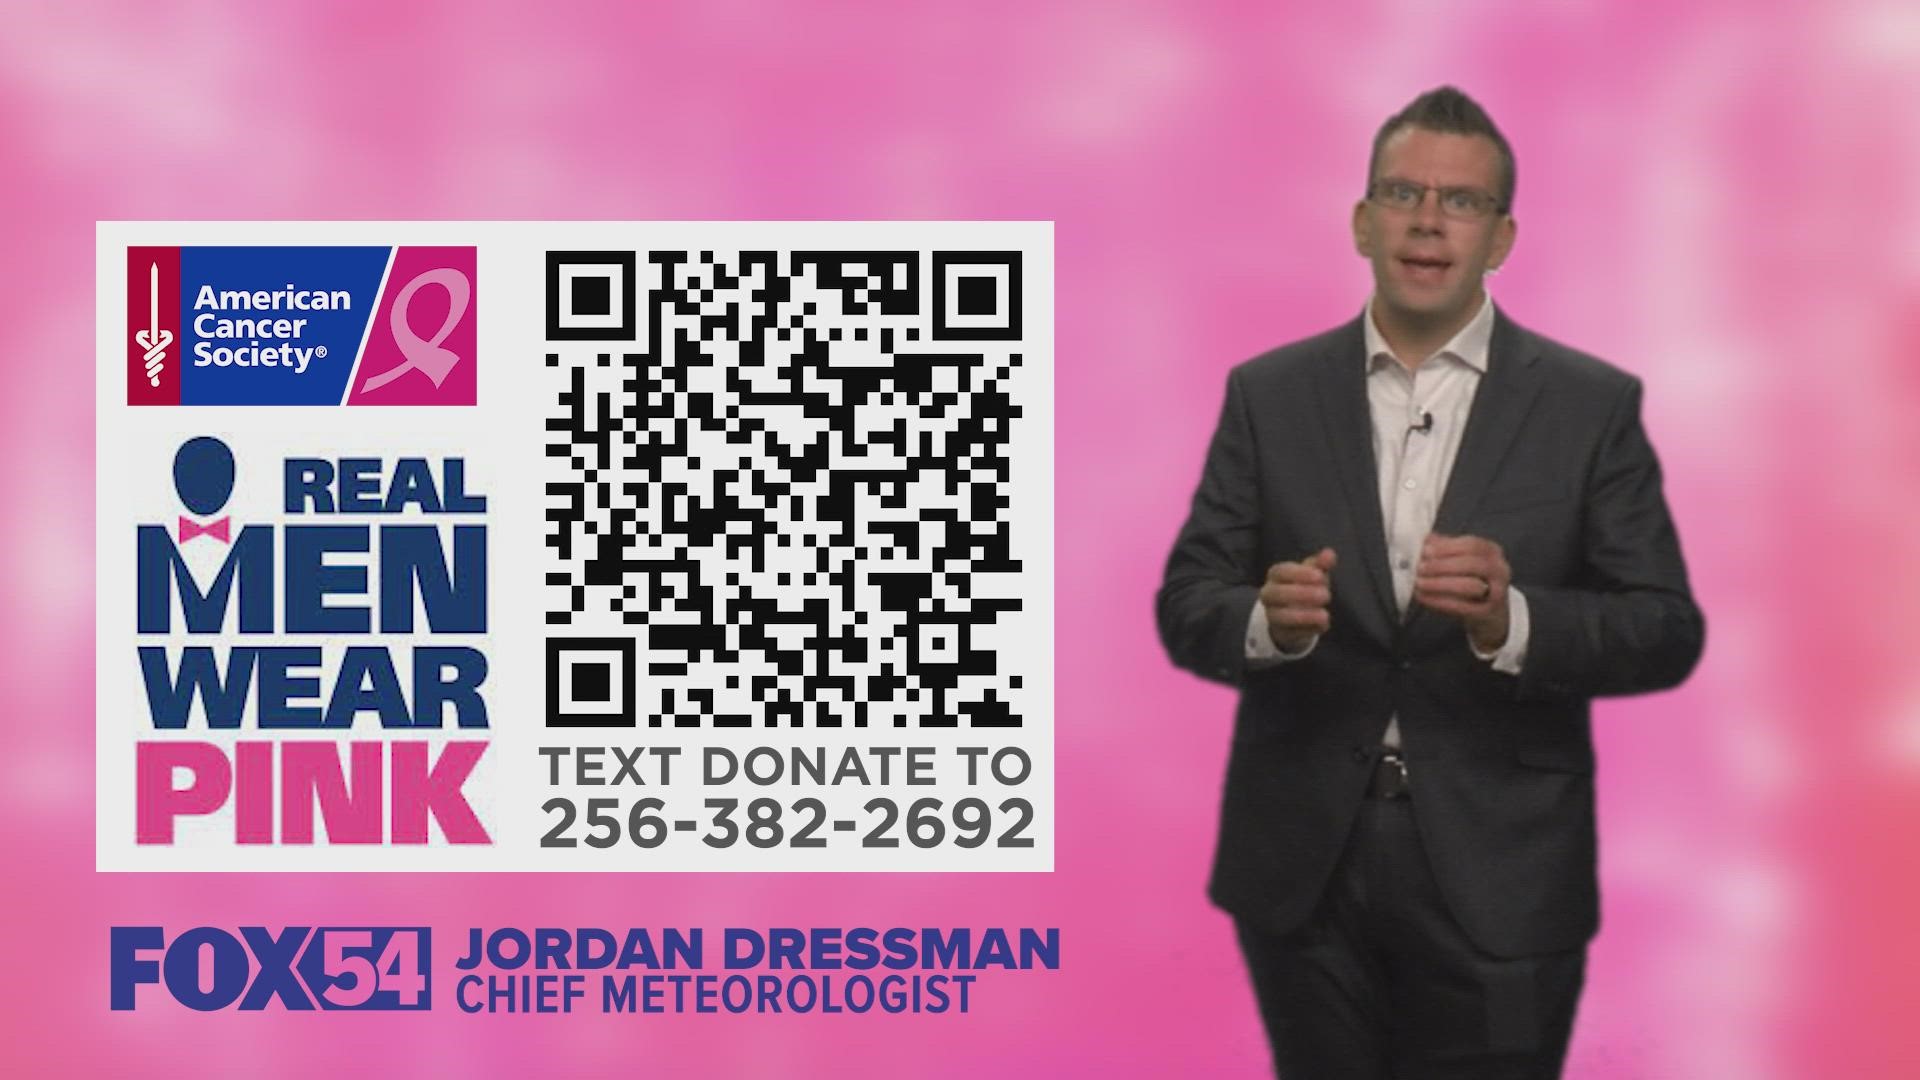 FOX54 News Chief Meteorologist Jordan Dressman wears pink to support breast cancer research. Donate by scanning the QR code or texting DONATE to 256-382-2692